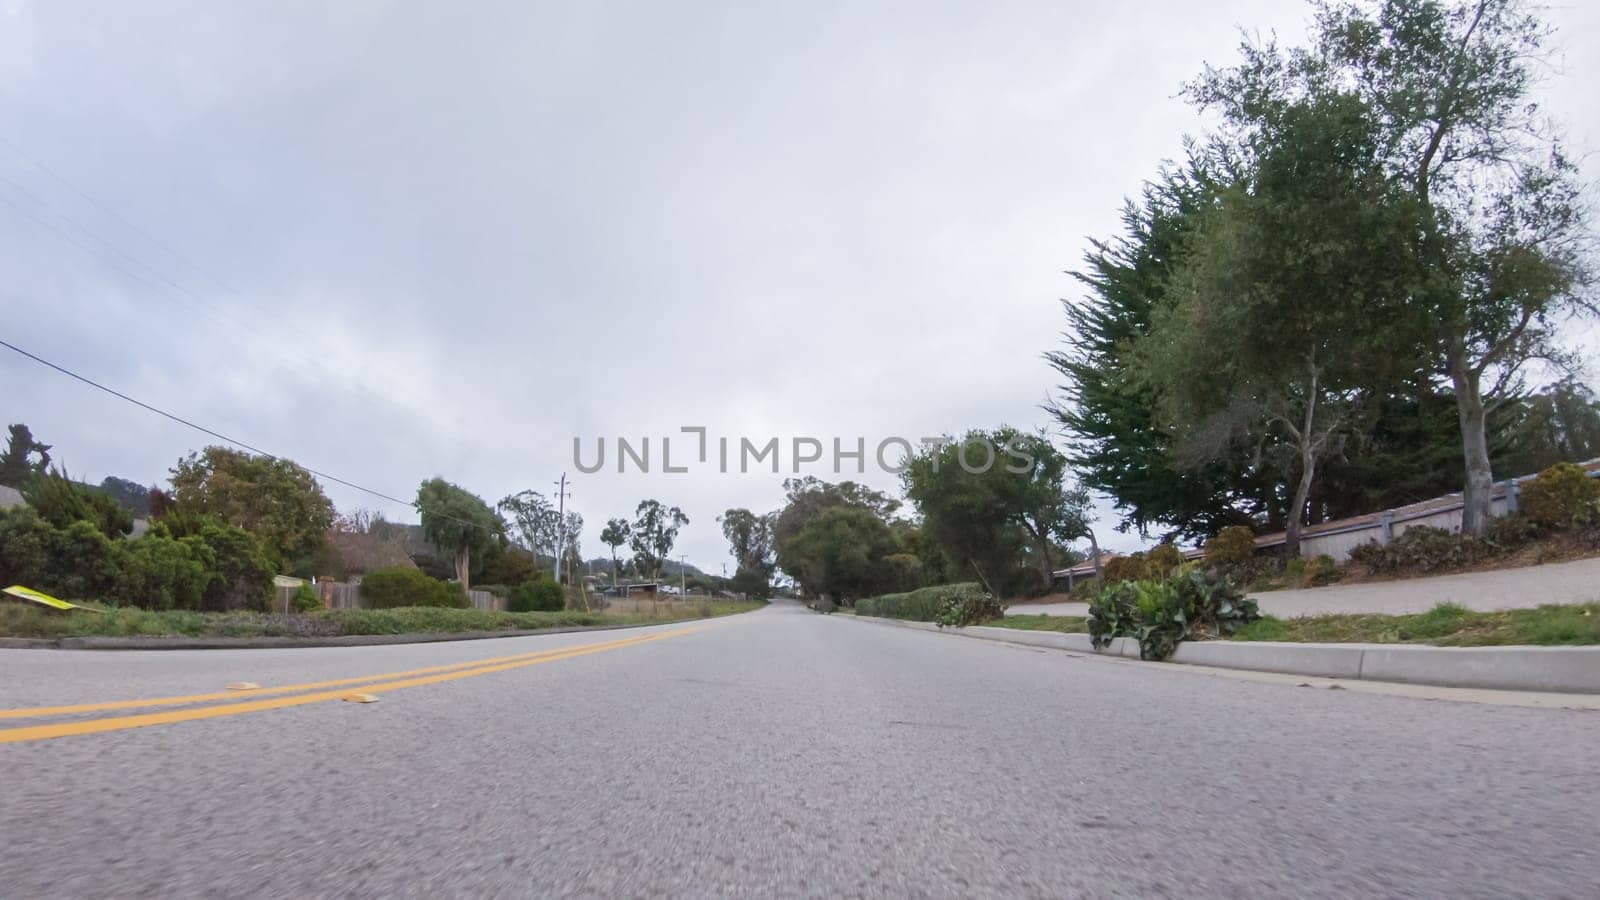 Vehicle navigates the streets of Morro Bay, California, during a cloudy winter day. The atmosphere is moody and serene as the overcast sky casts a soft light on the charming buildings and quiet streets of this coastal town.